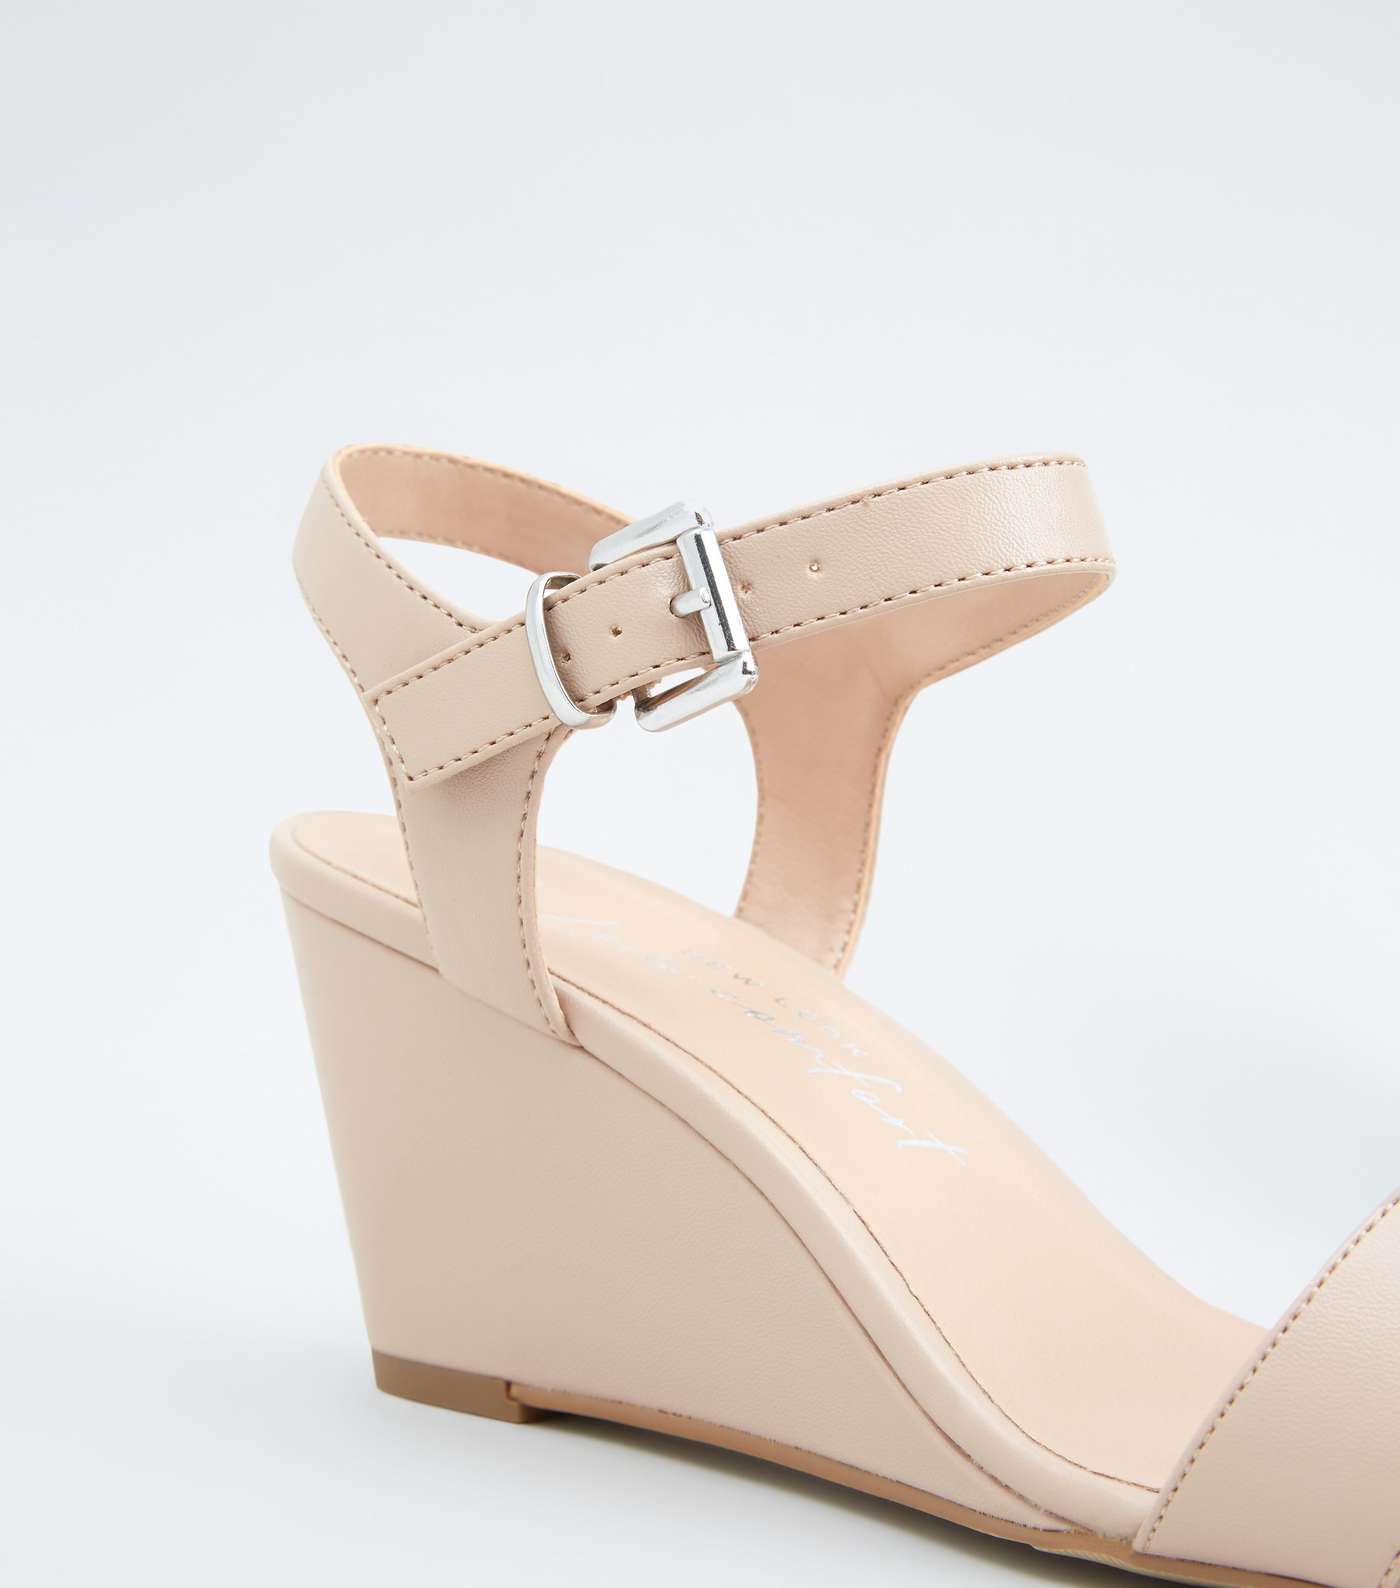 Wide Fit Pale Pink 2 Part Wedge Sandals Image 3